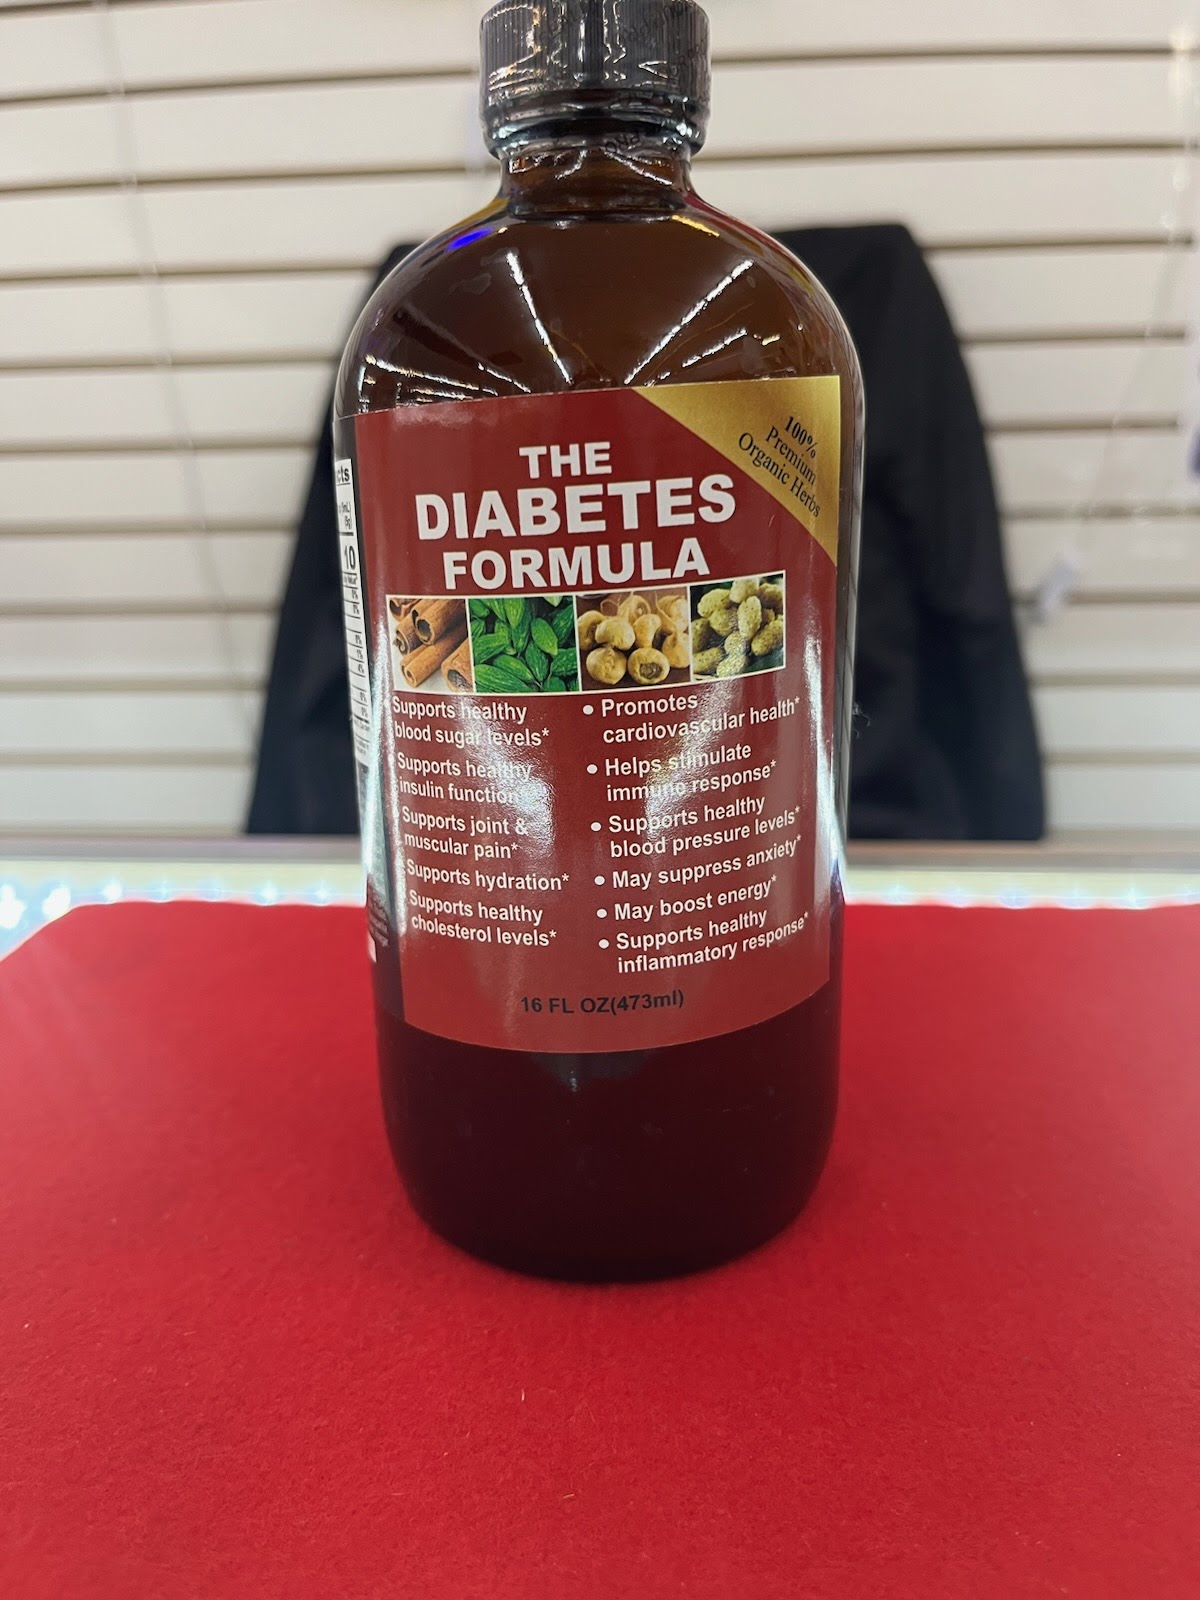 A bottle of liquid with the label for the diabetes formula.